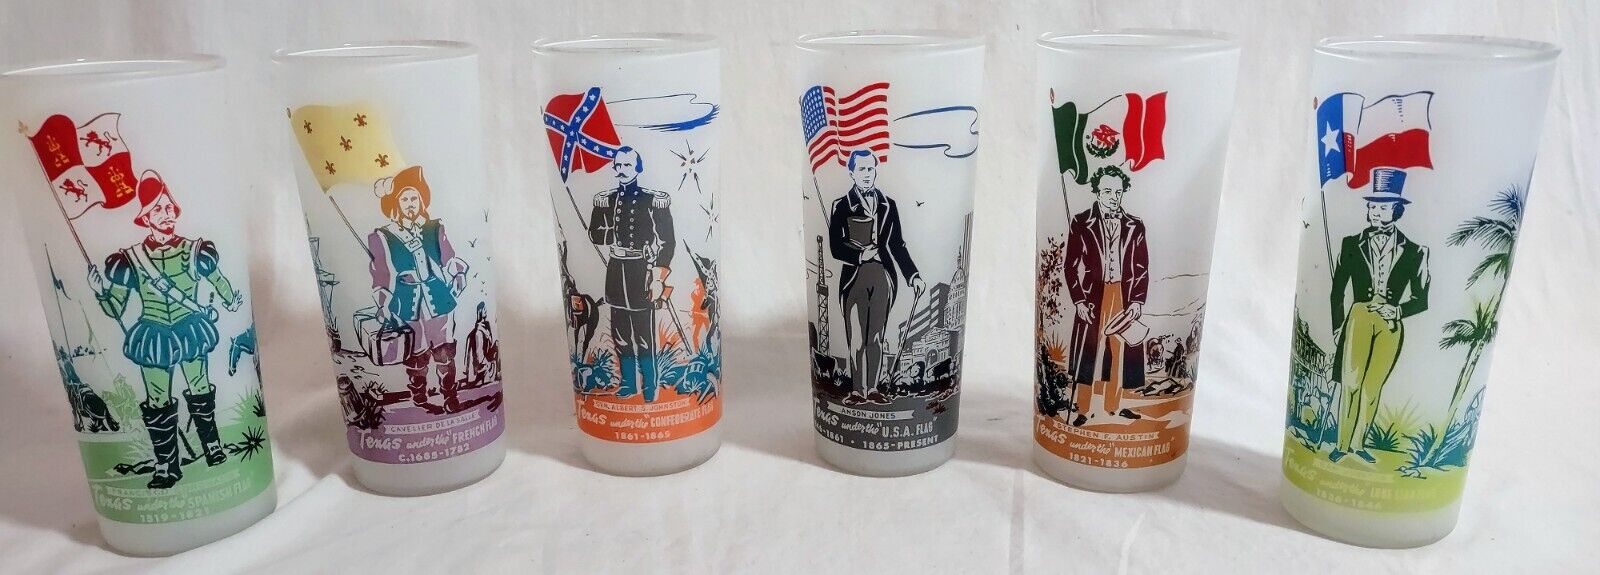 LOT of 6 VTG EUC Knox Oil Company Frosted Glass Tumblers Texas Under Flags Theme